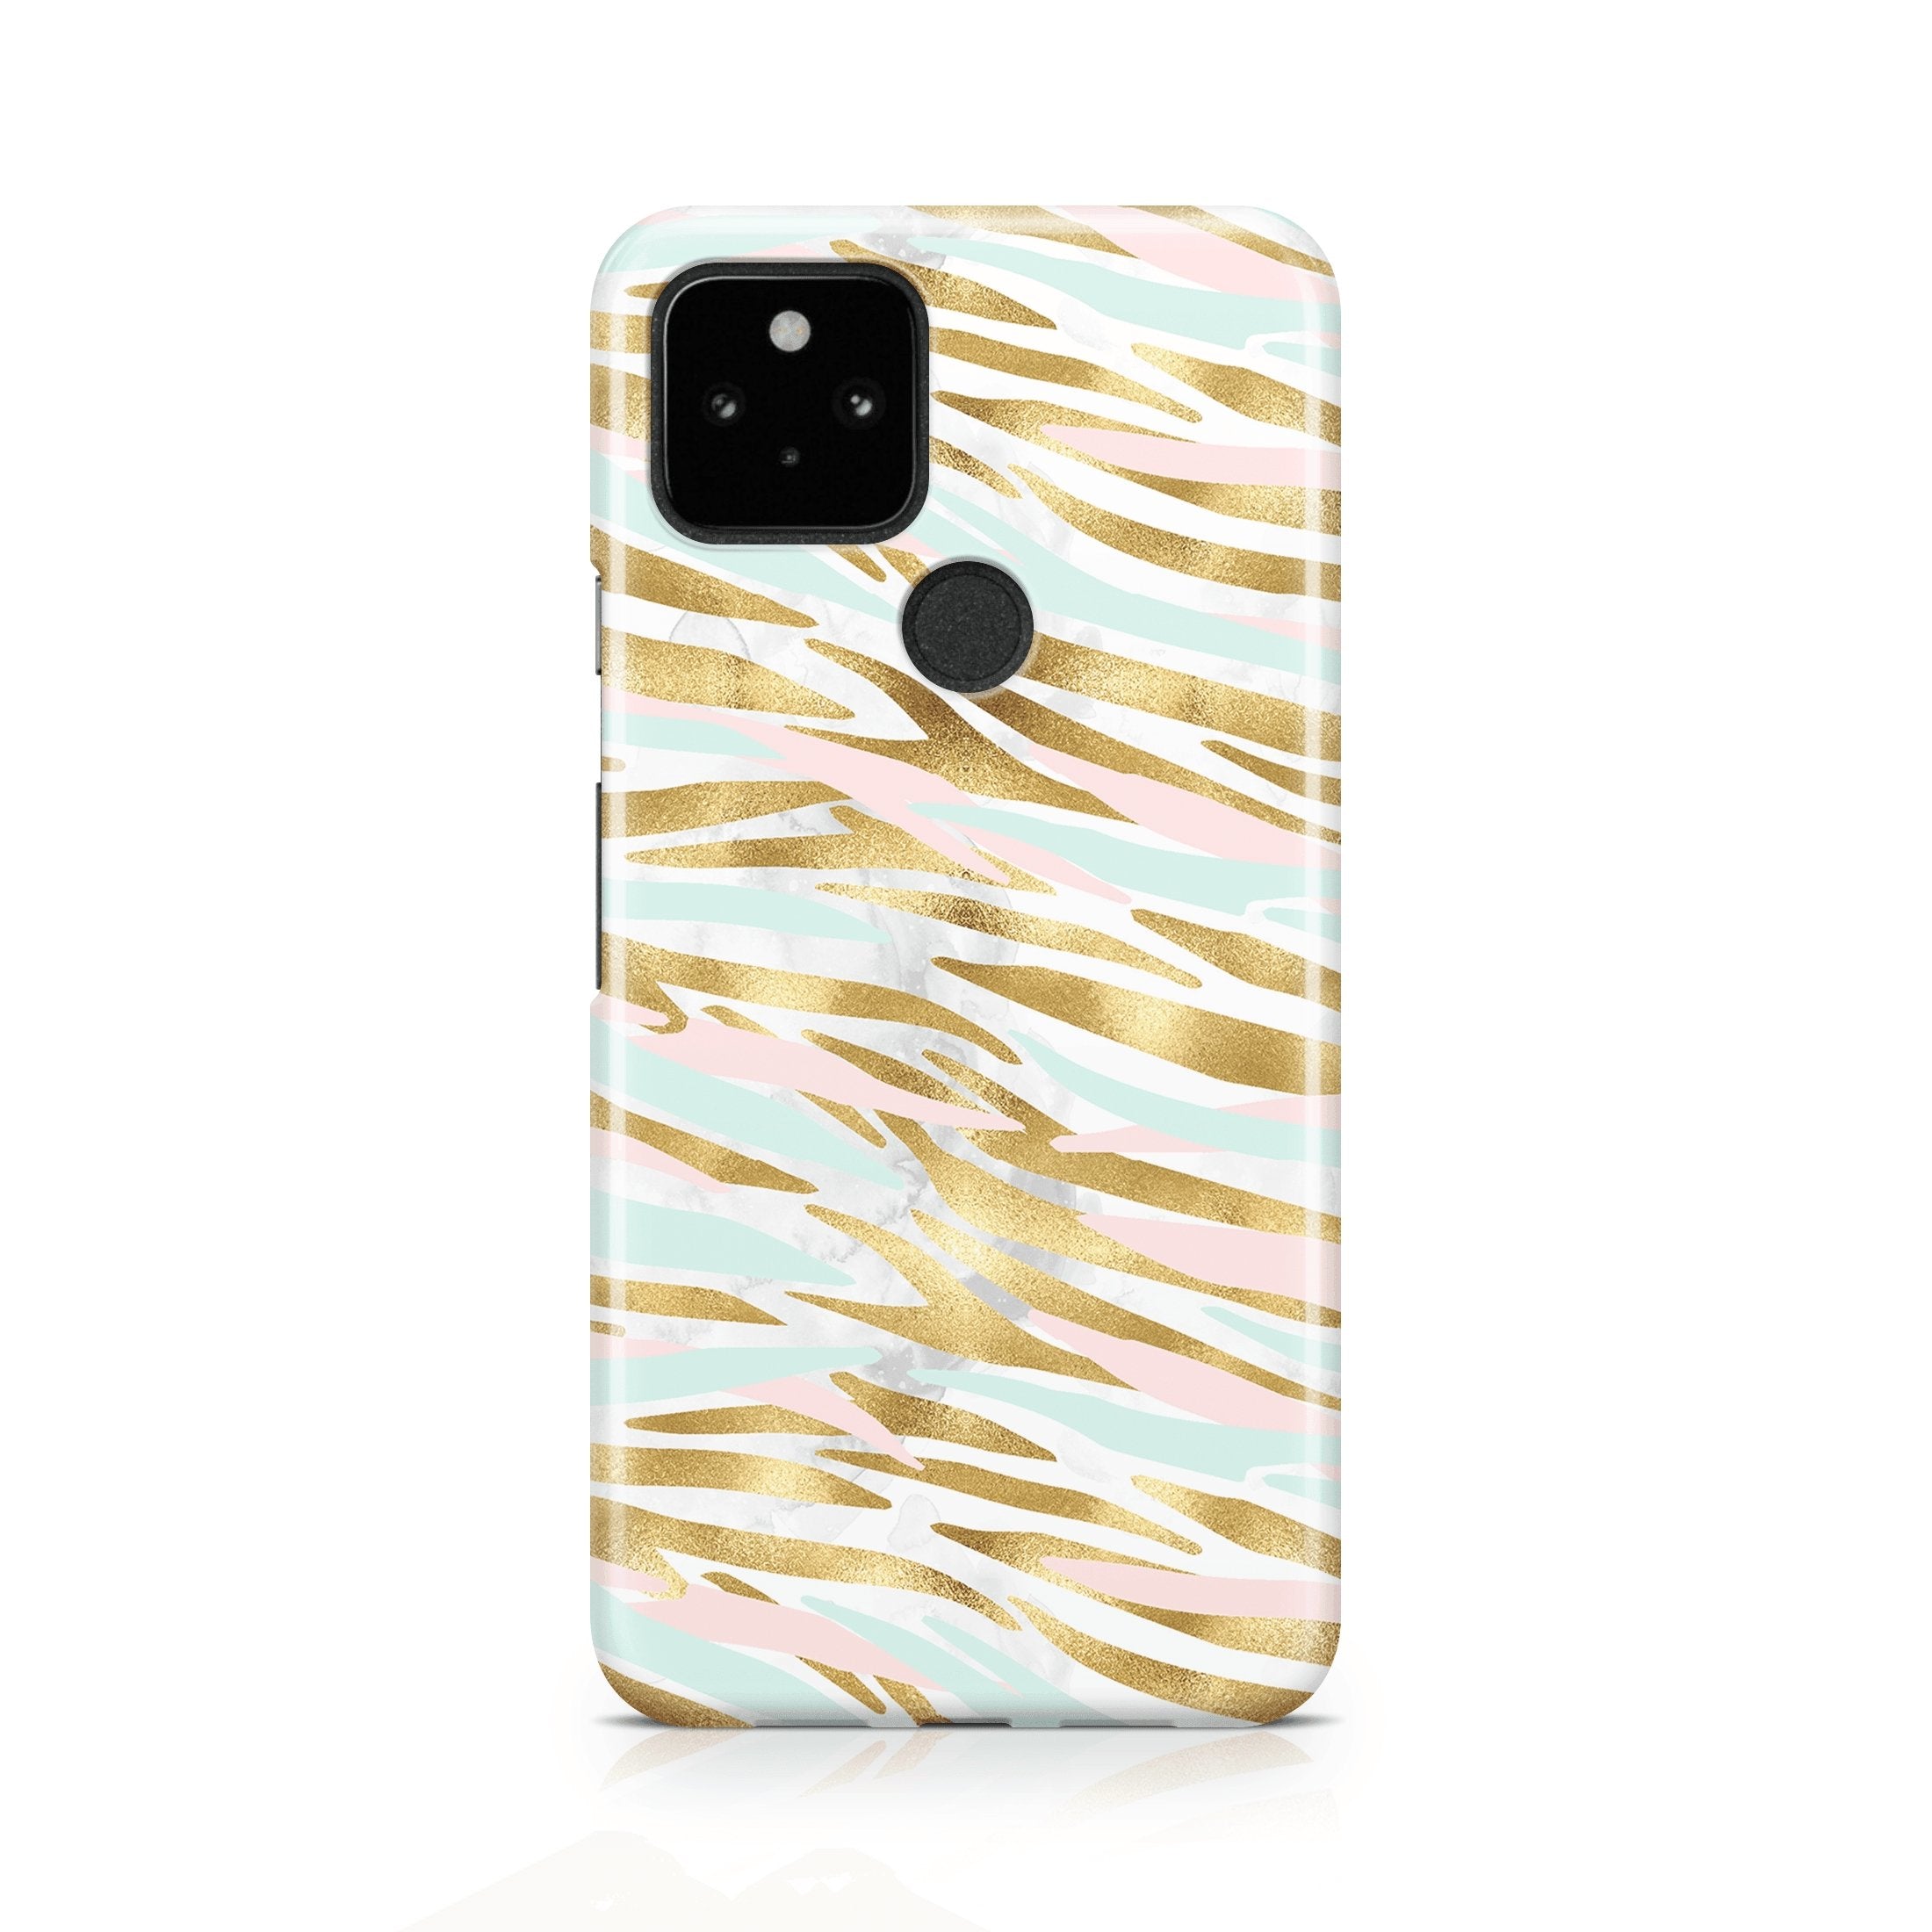 Mint Pink Gold Tiger Stripe - Google phone case designs by CaseSwagger